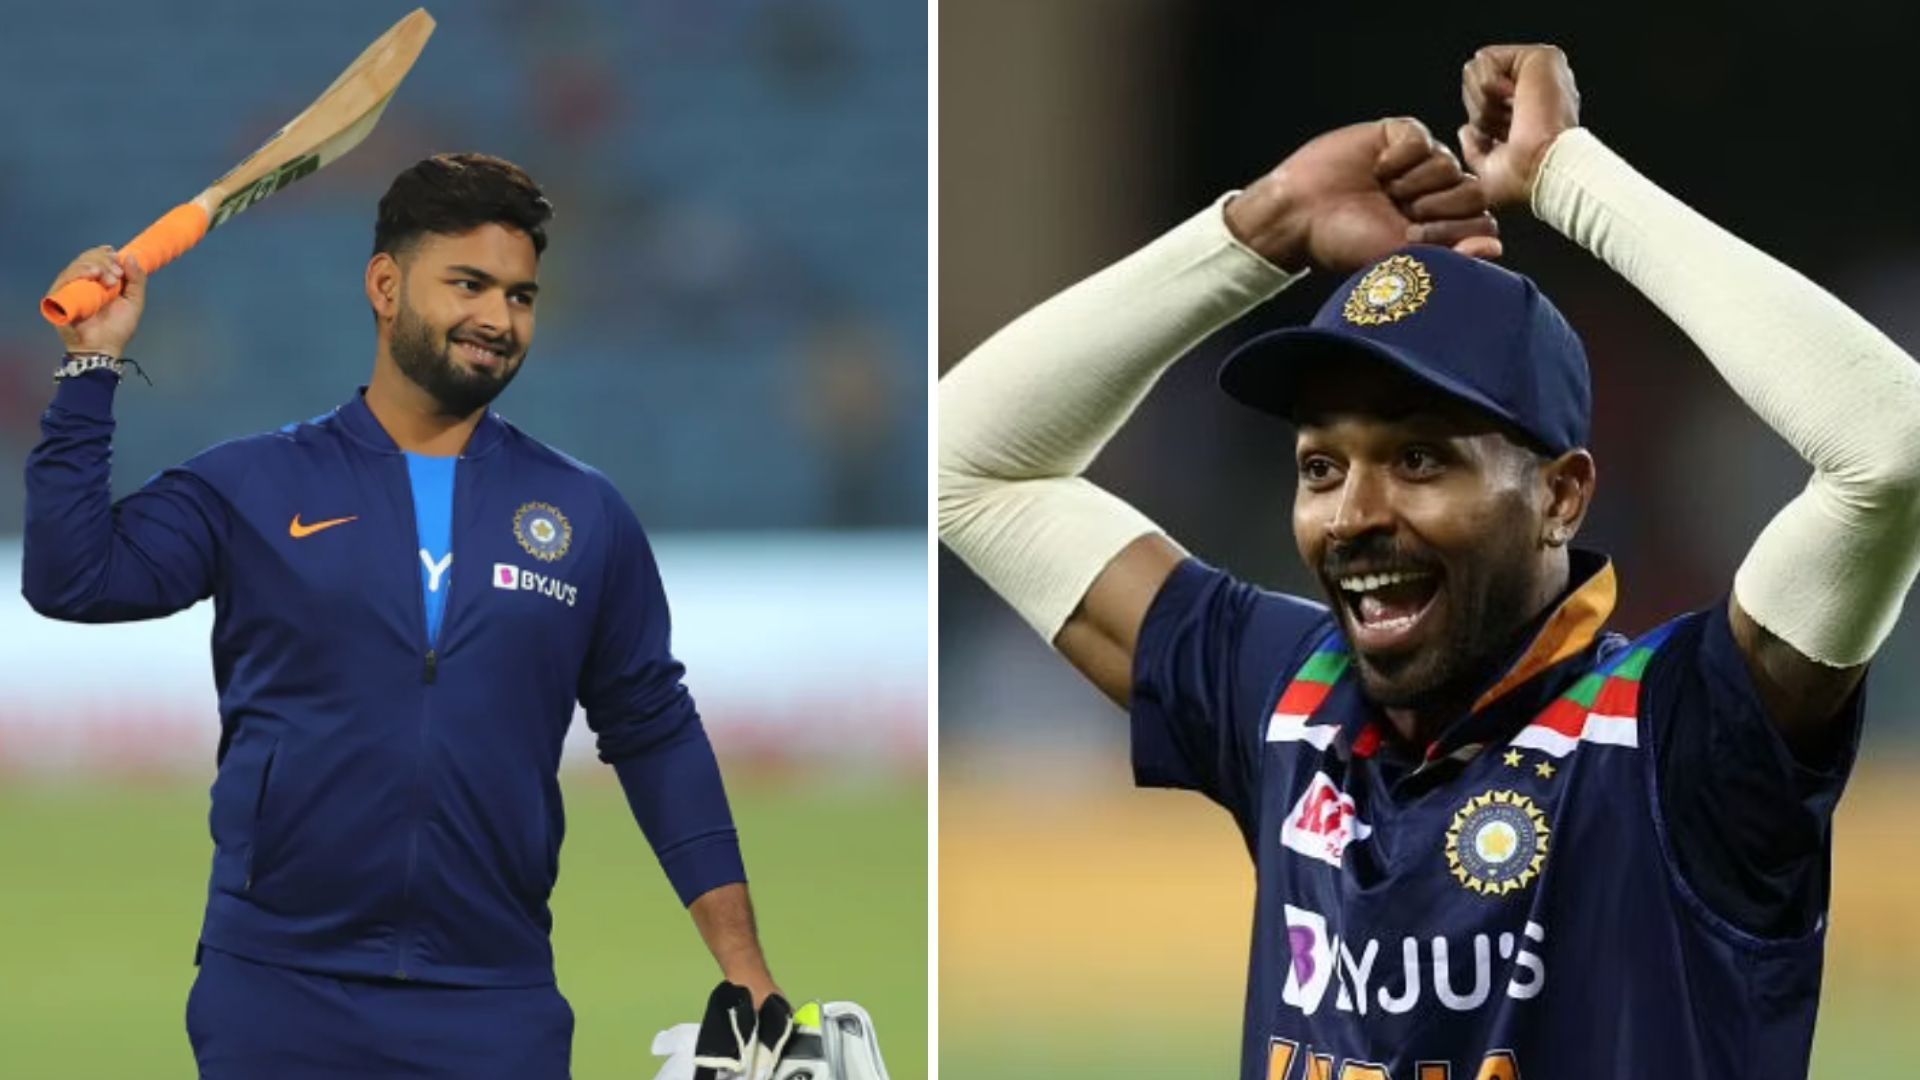 Rishabh Pant [L] will captain the Indian cricket team while Hardik Pandya has been named VC